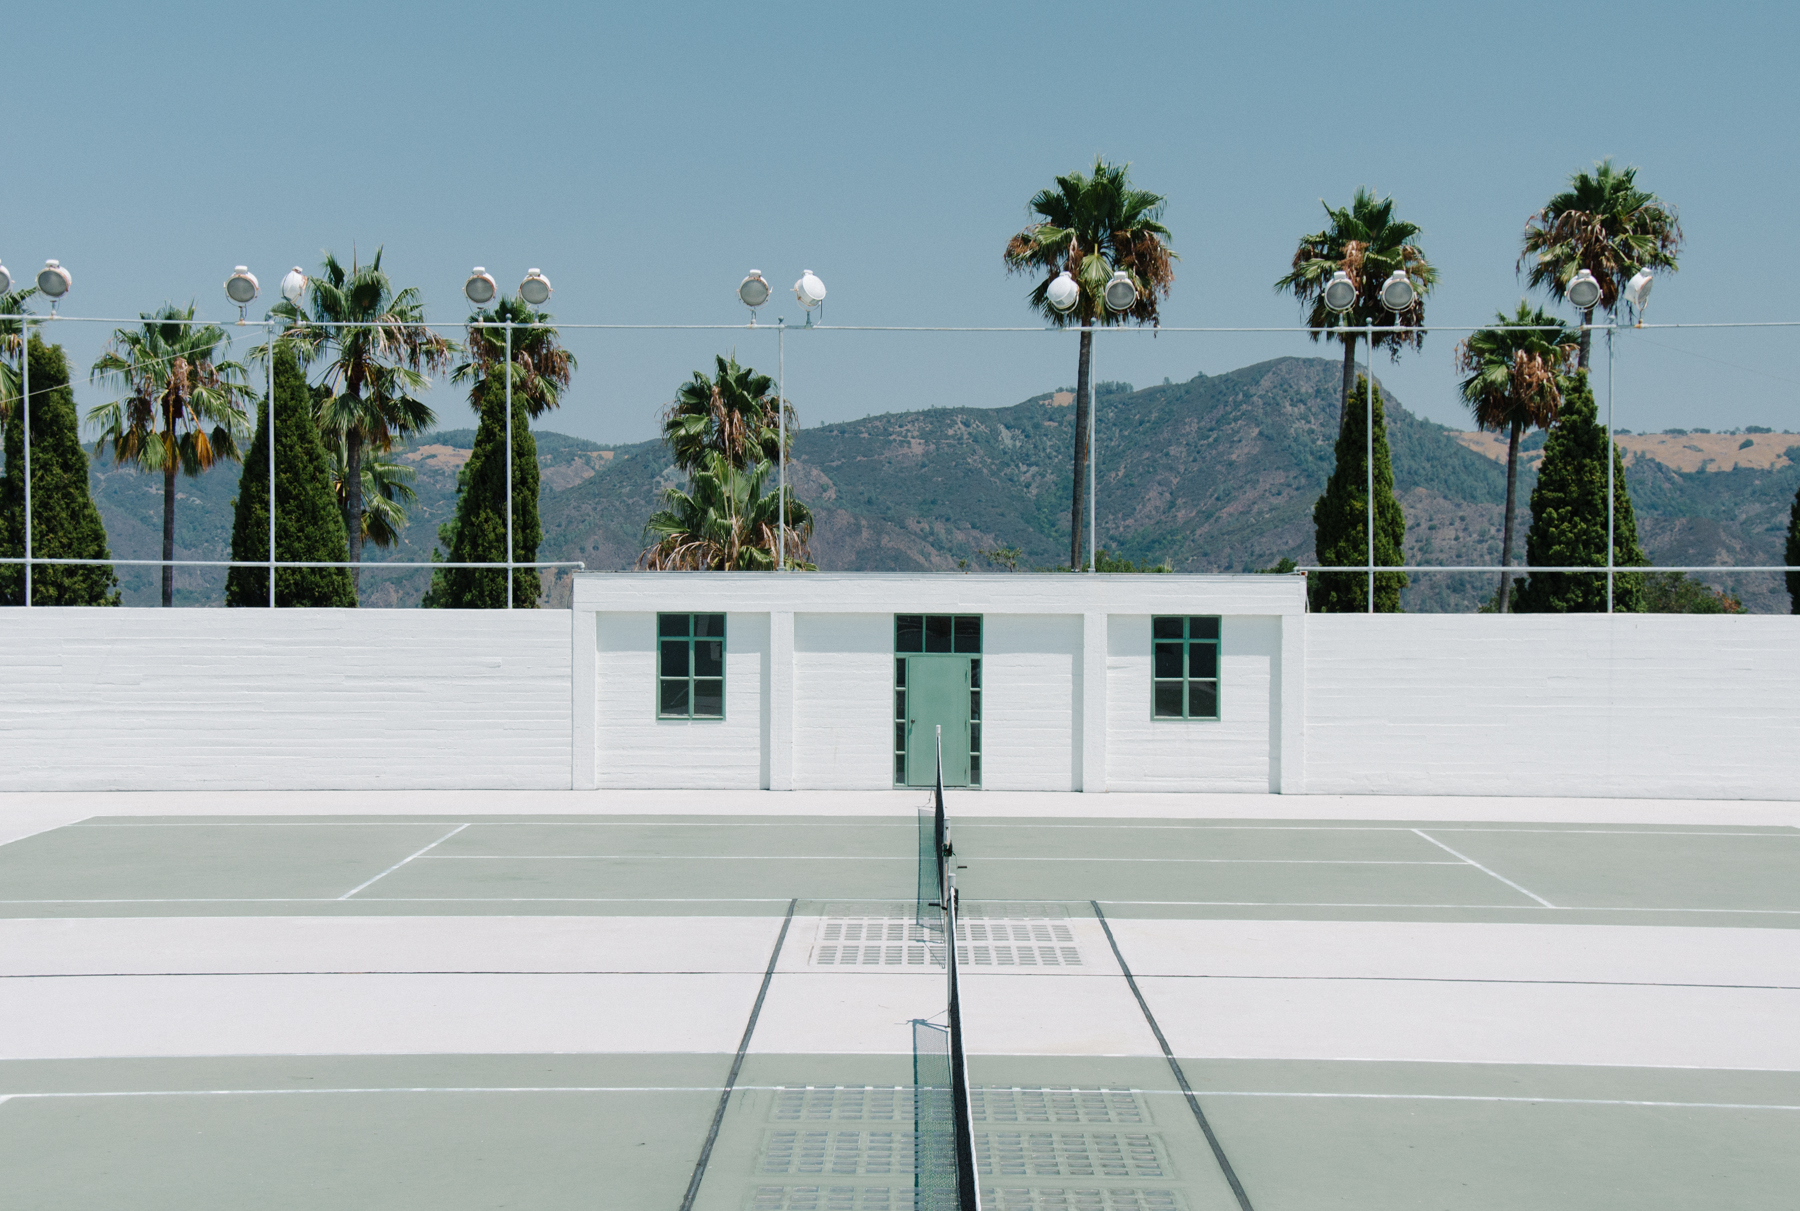 The tennis court is the only minimalist thing at the architectural craziness that is Hearst Castle.